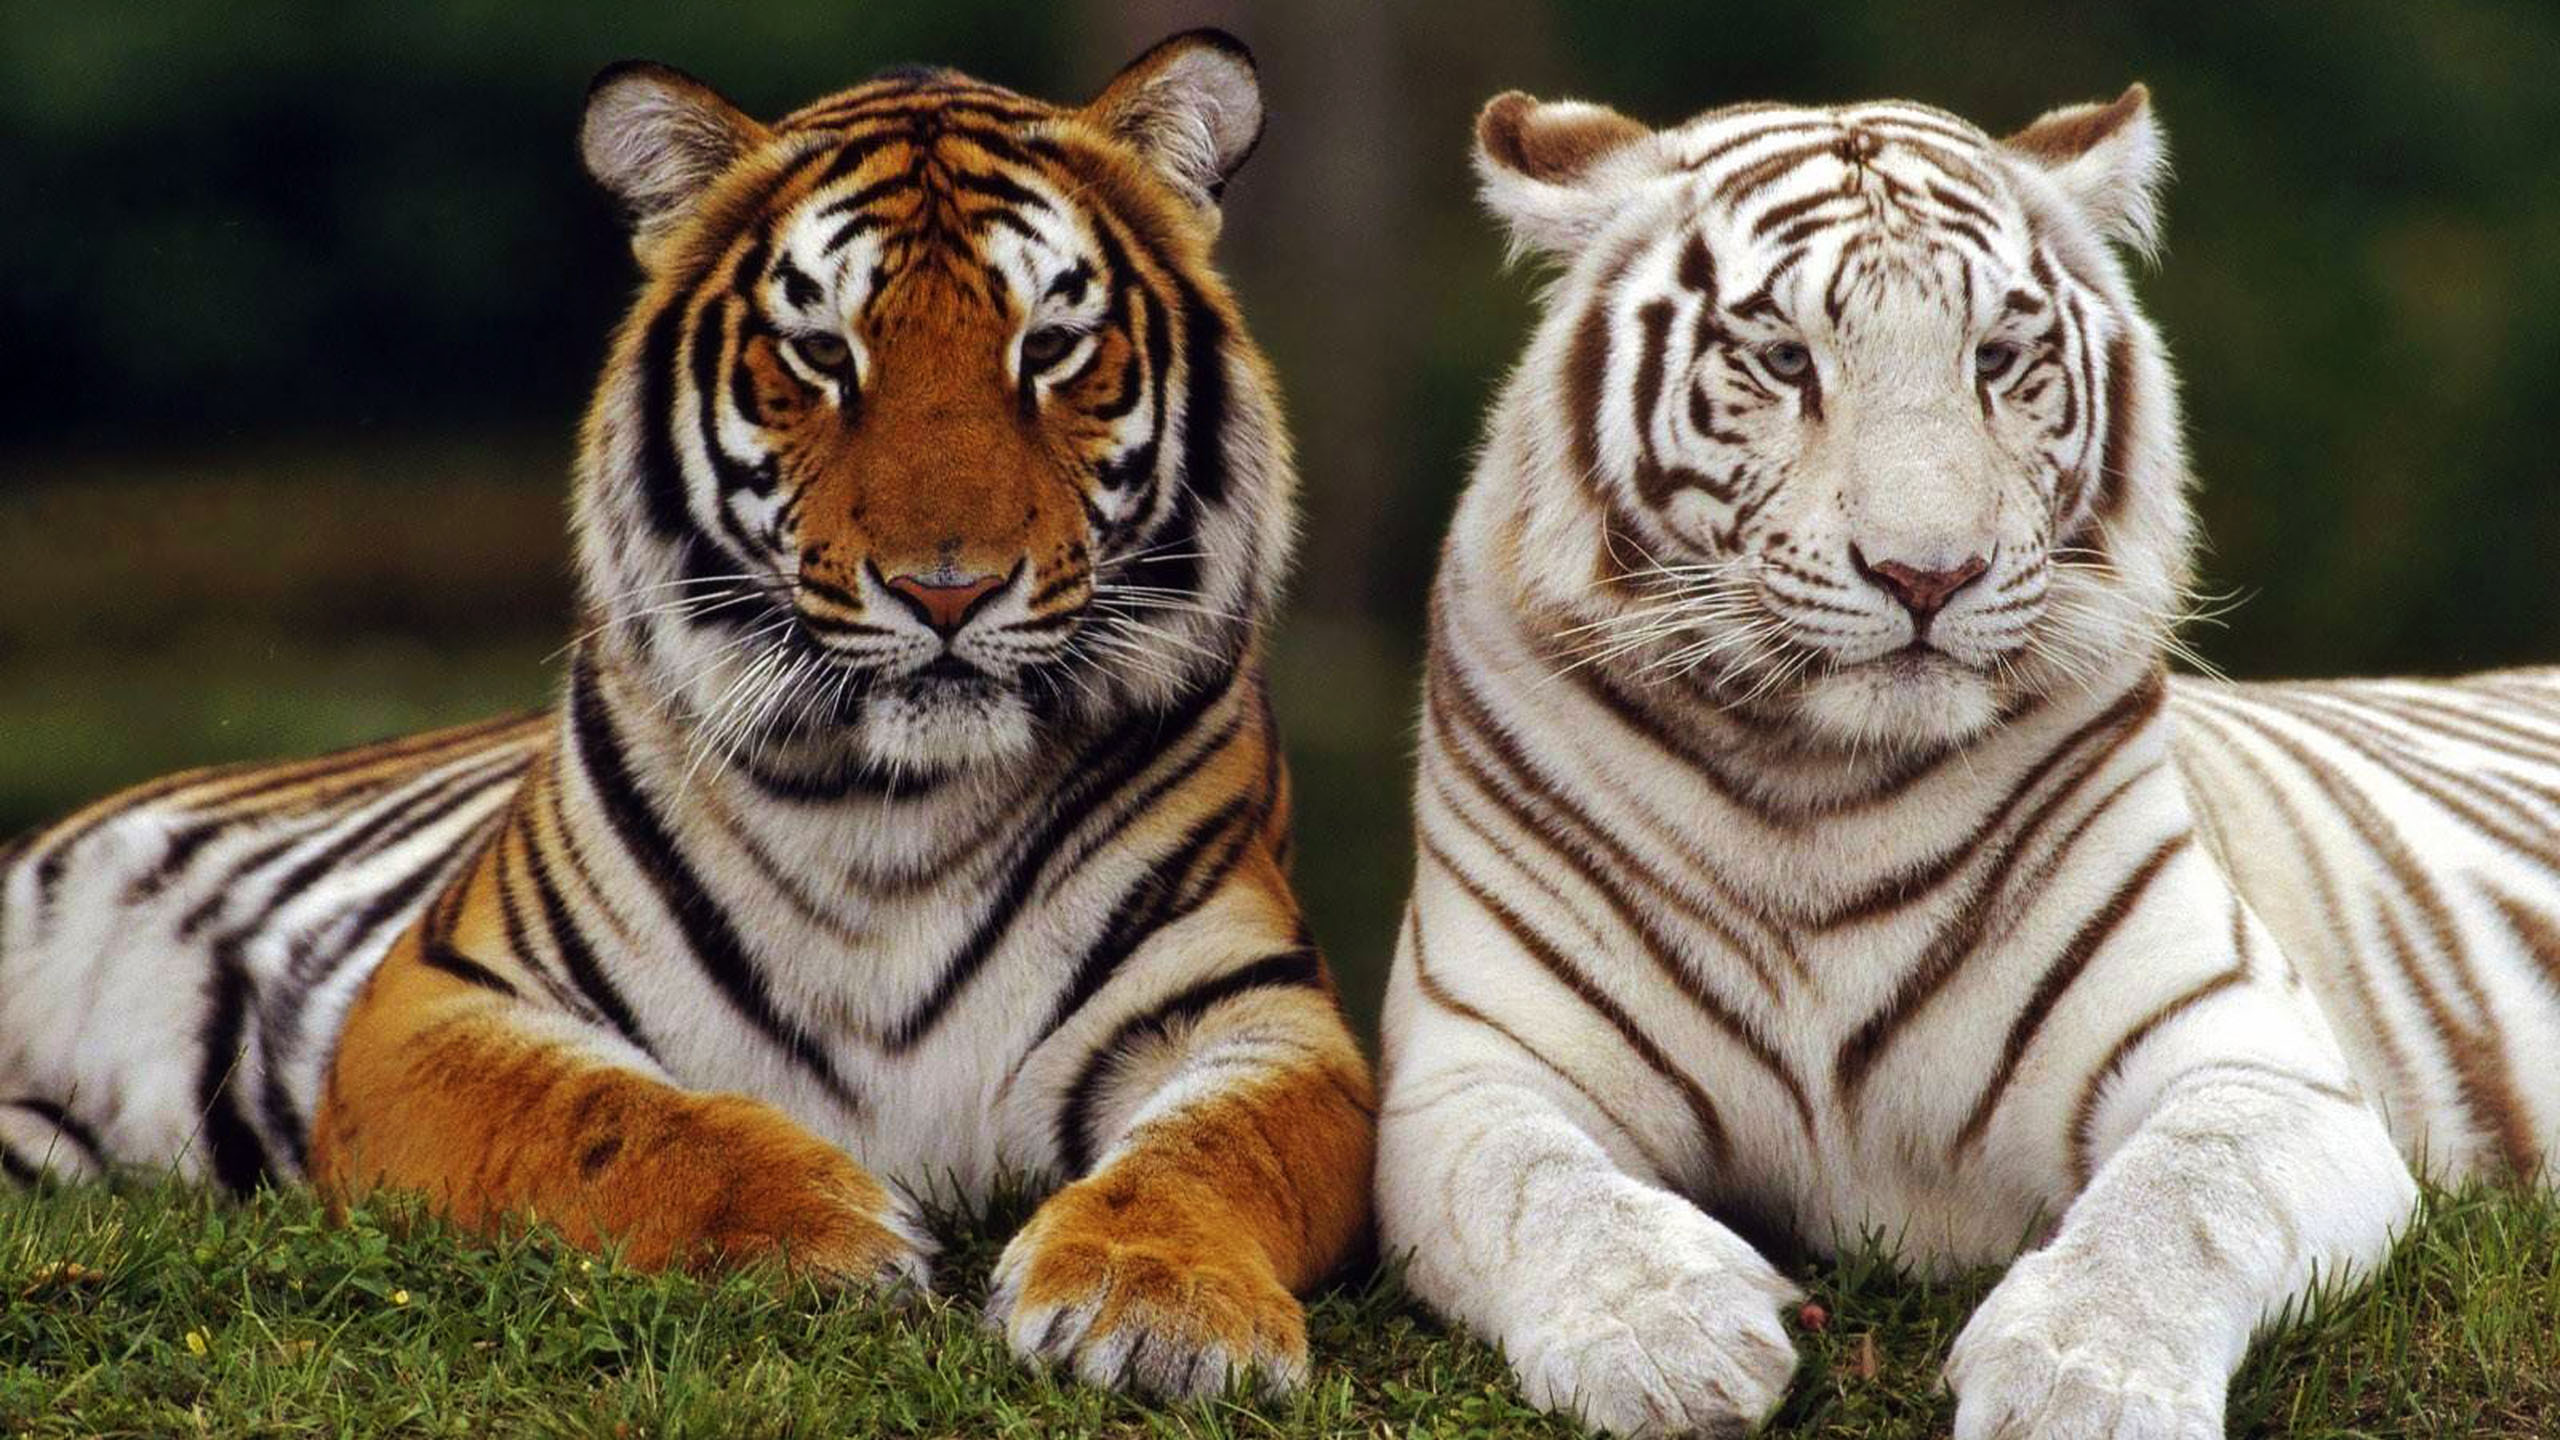 7 Facts About White Tigers - Some Interesting Facts